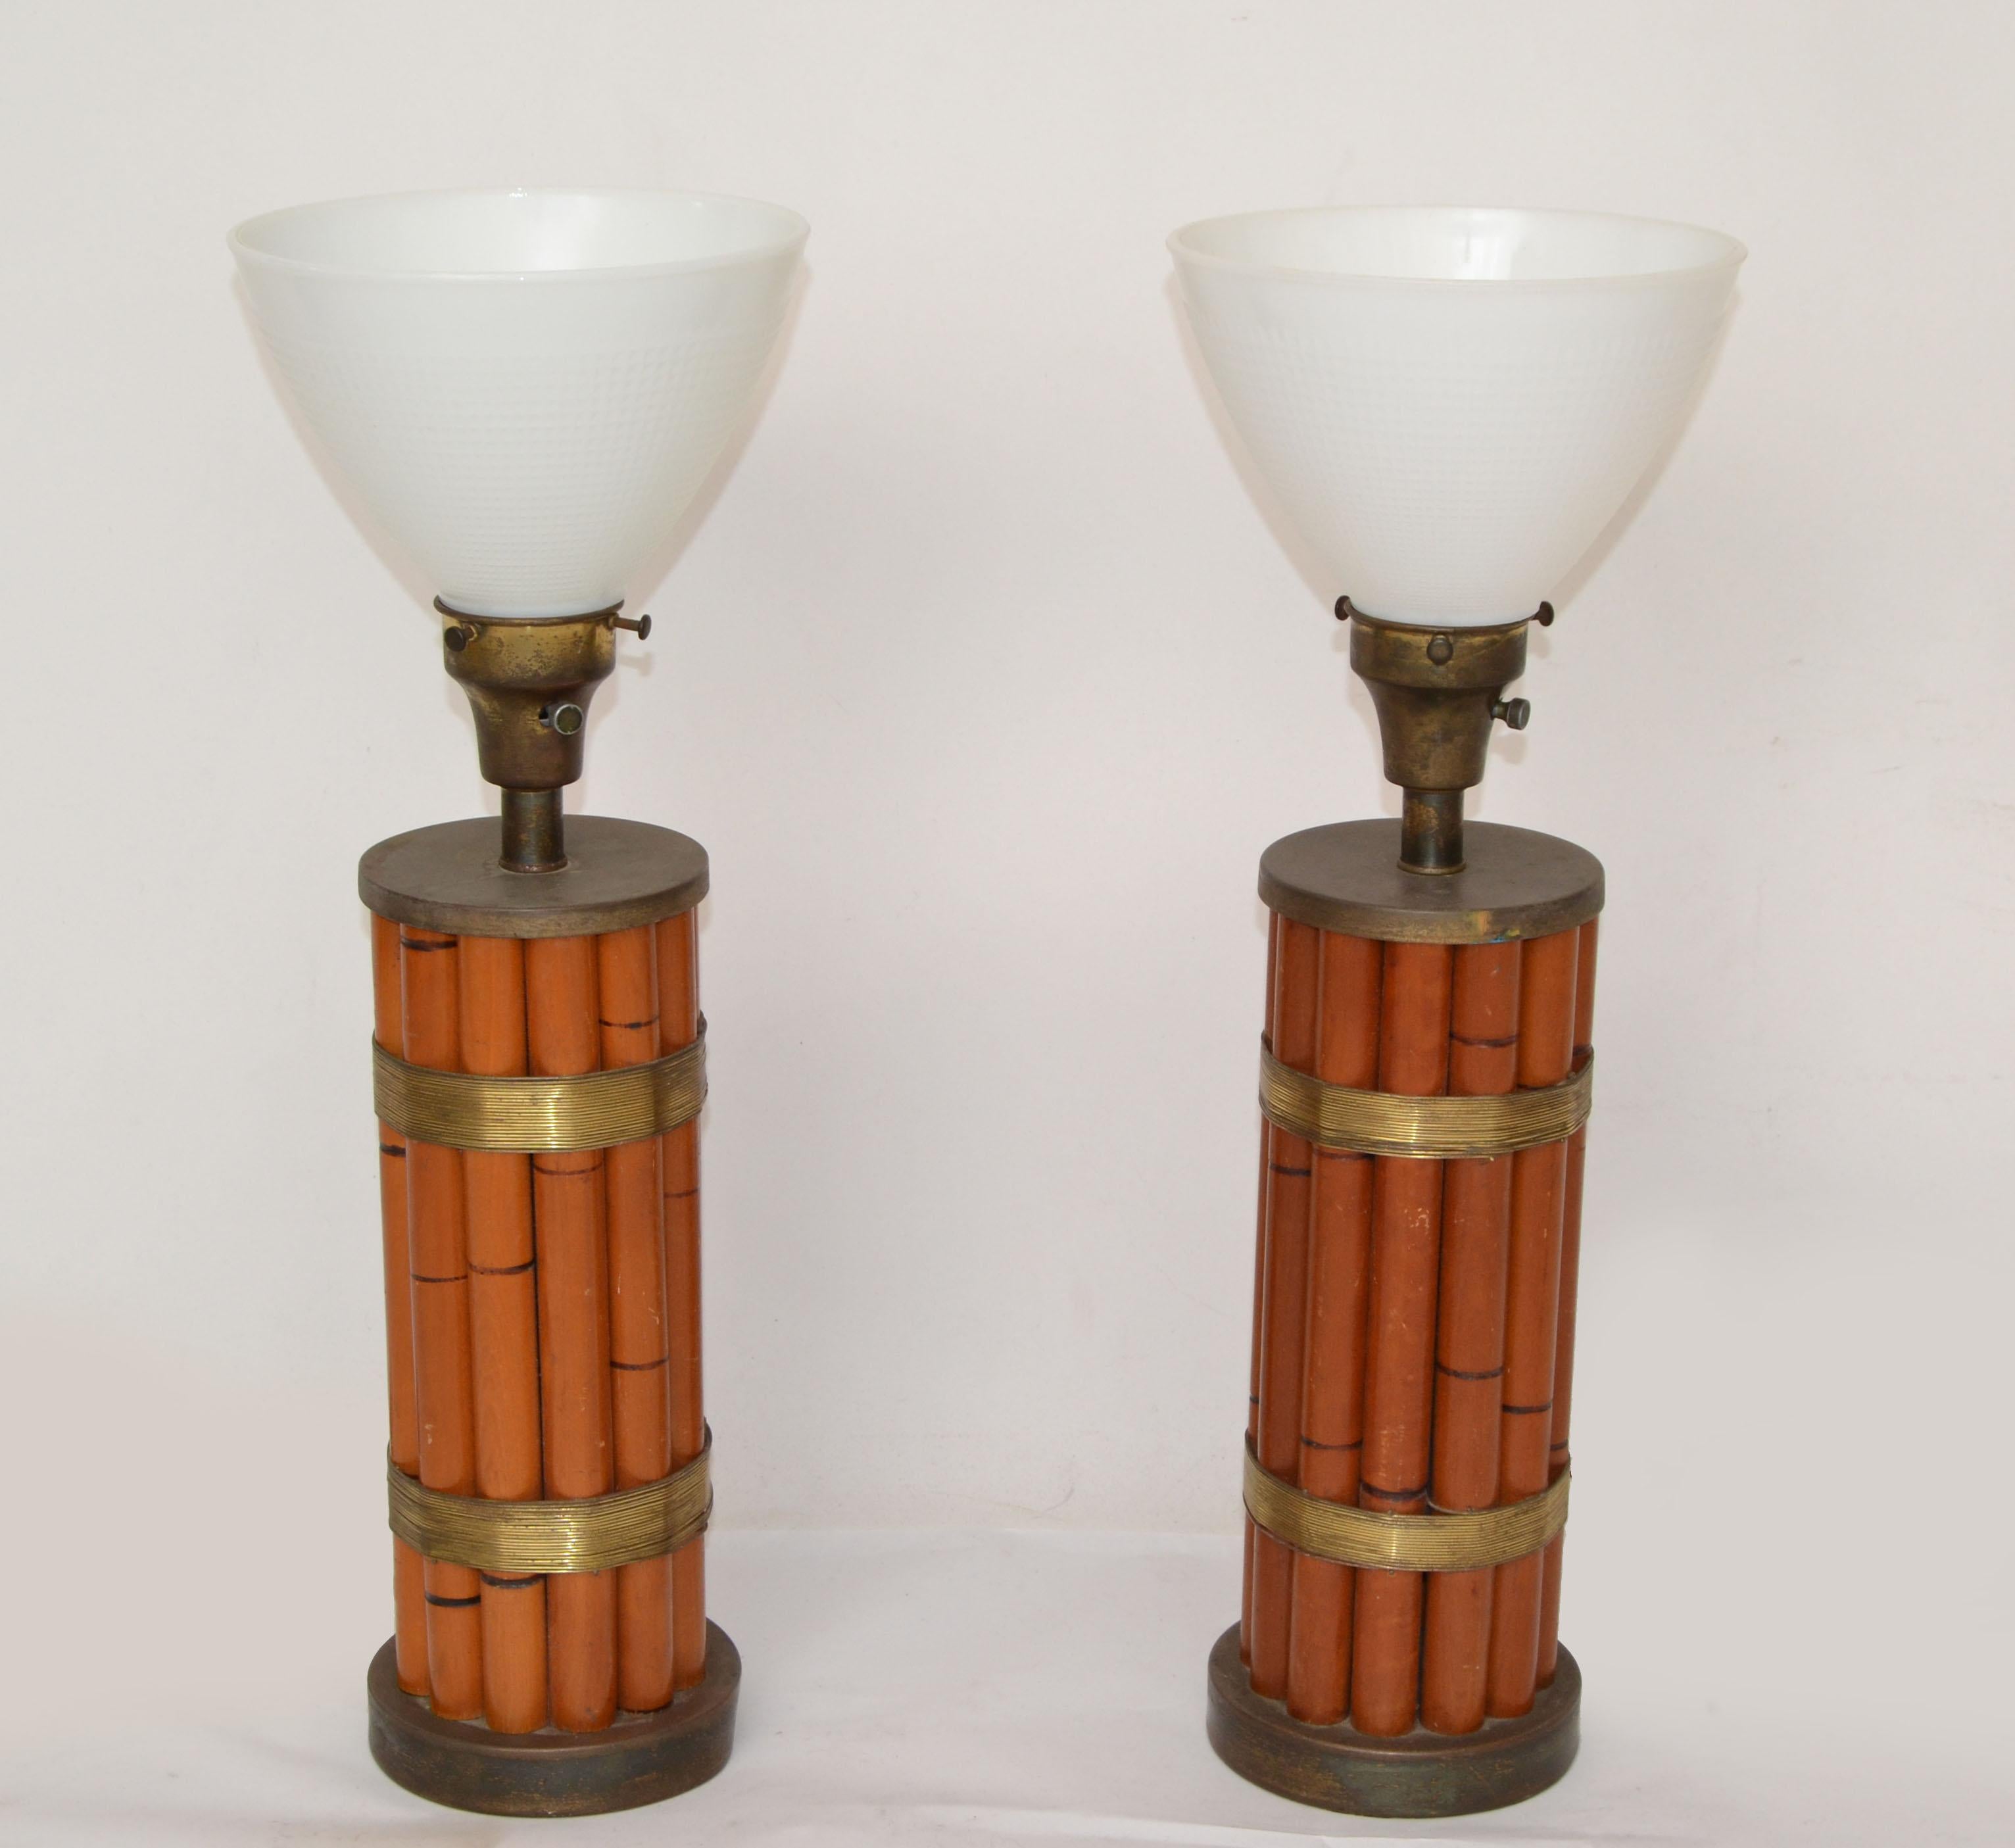 1950 Russel Wright Chapman Manufacturing Company style handcrafted Mid-Century Modern pair of bamboo and brass details table lamps with milk glass globes.
Both are wired for the U.S. and uses a regular or LED light bulb.
Great addition for Your